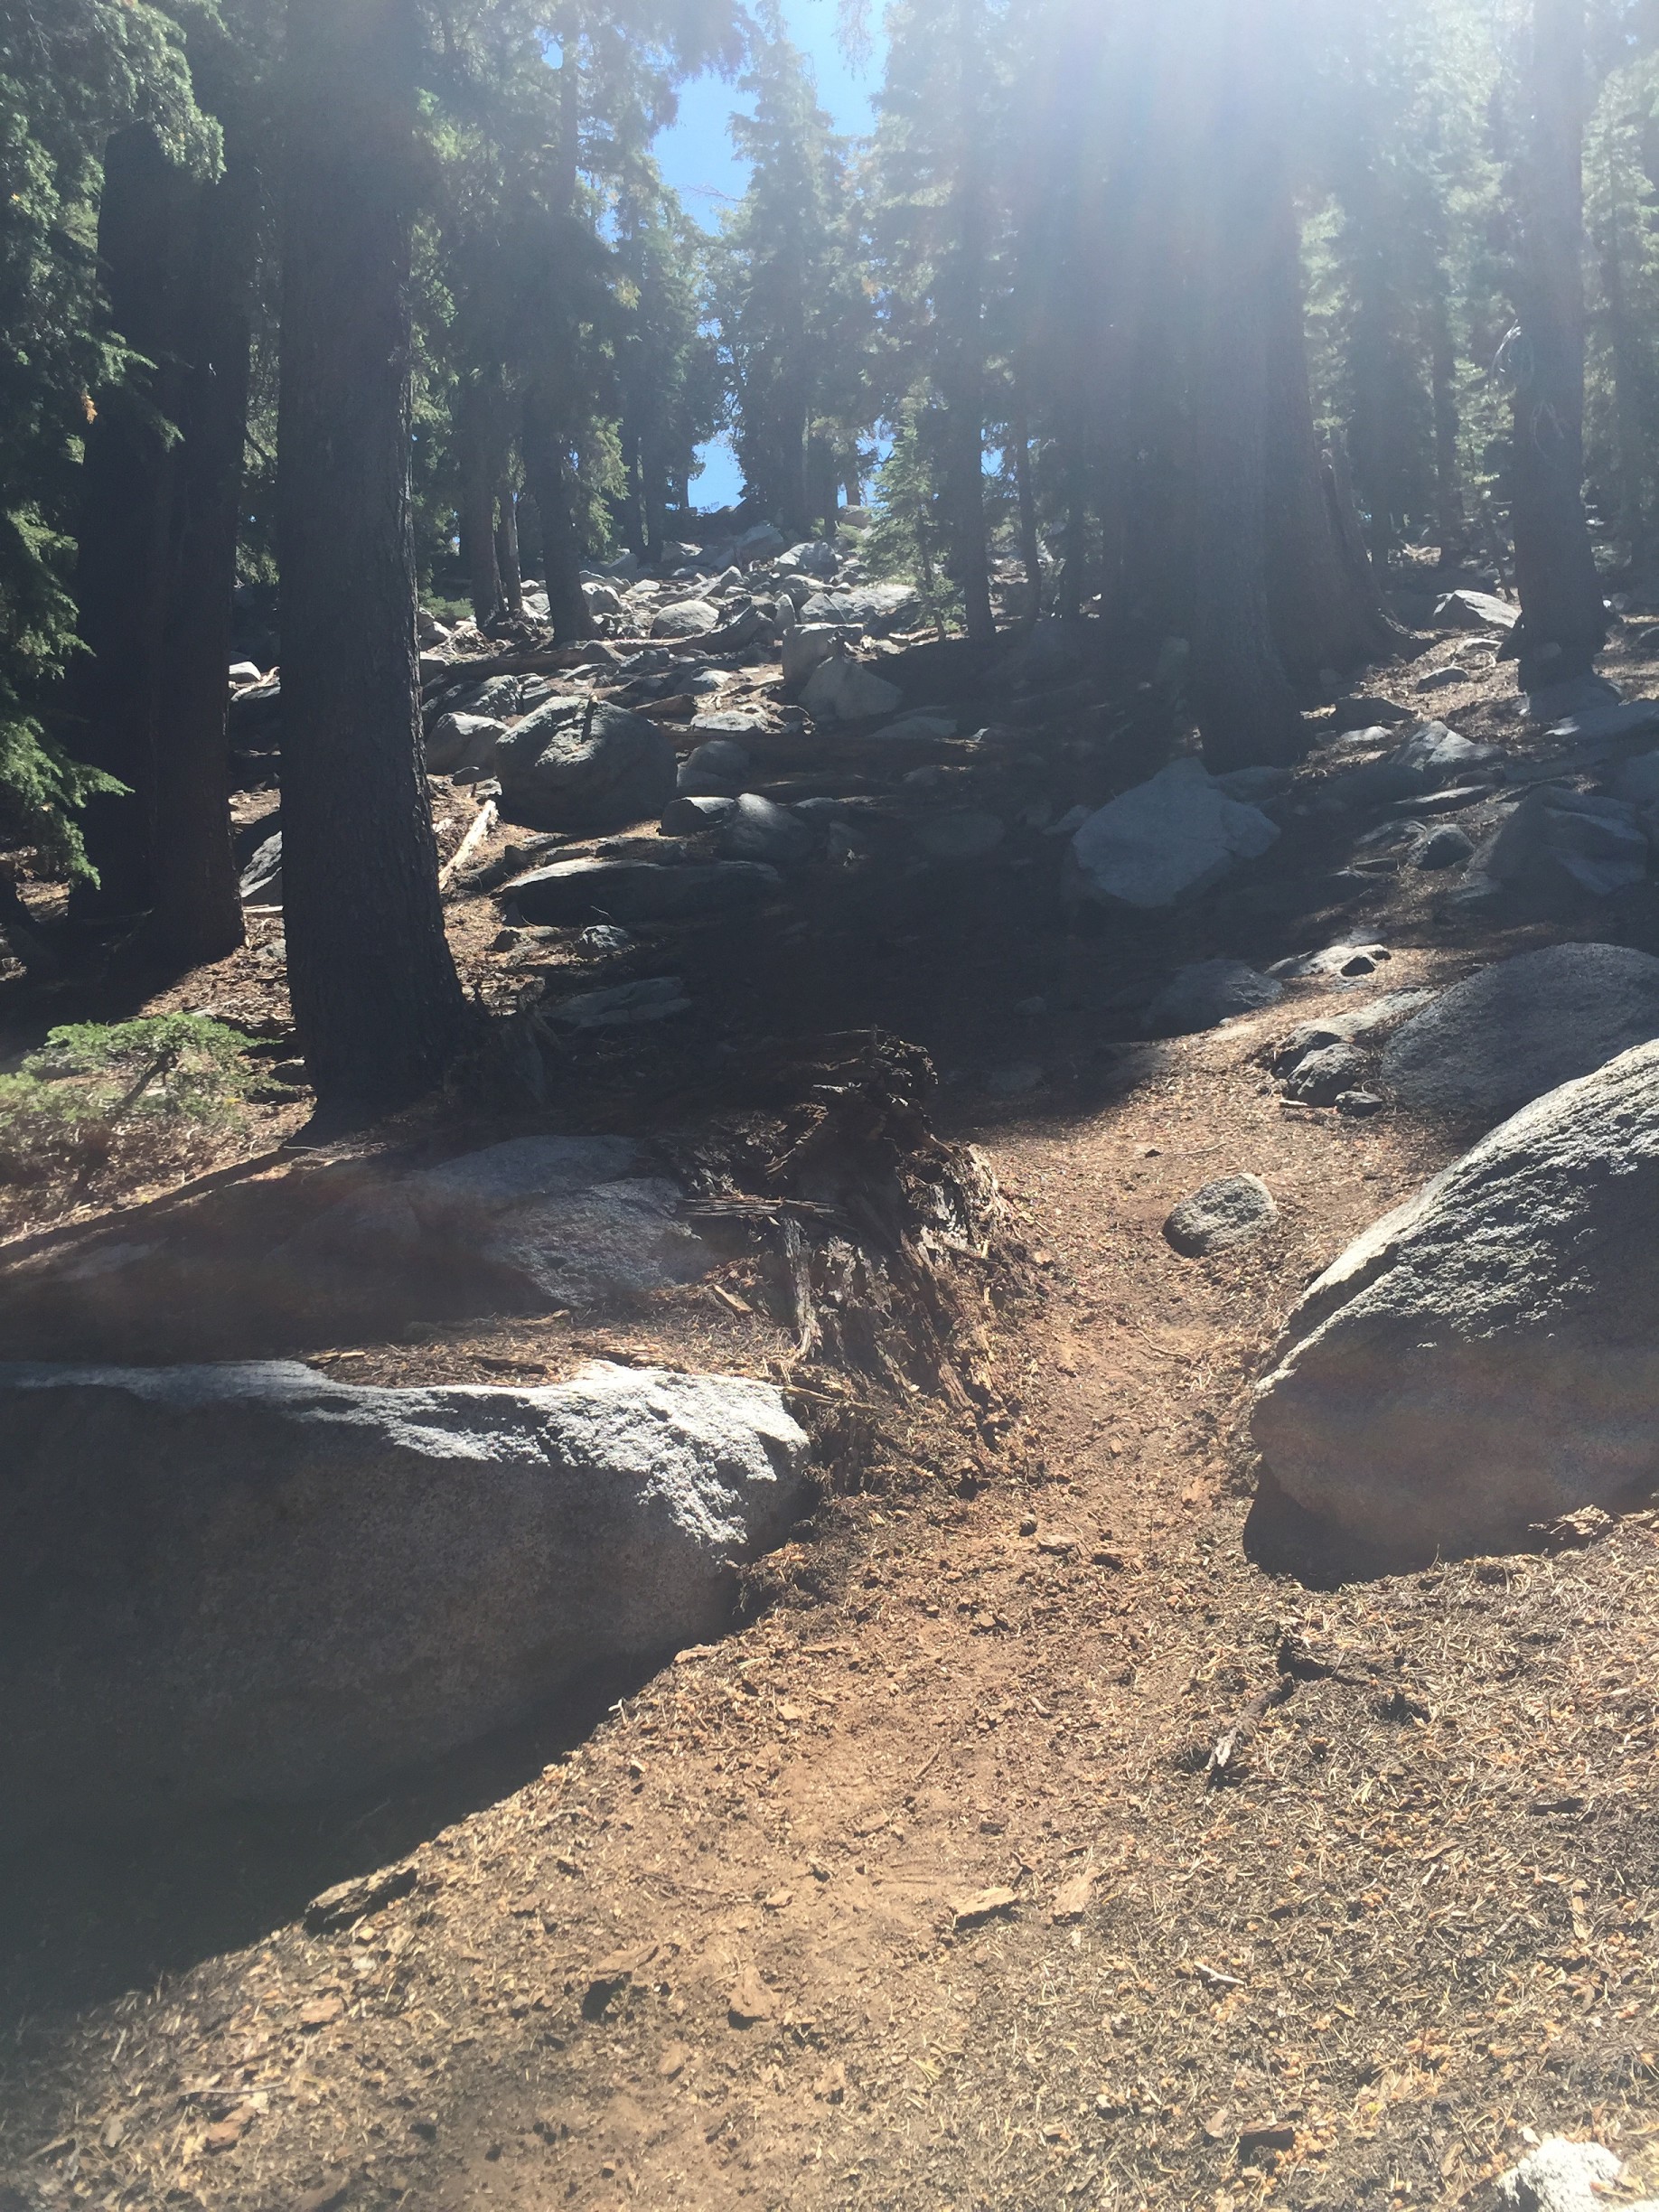 Some of the climb up to Maggie's Peaks is very steep and lined with loose dirt. 8/25/2016 Lake Tahoe